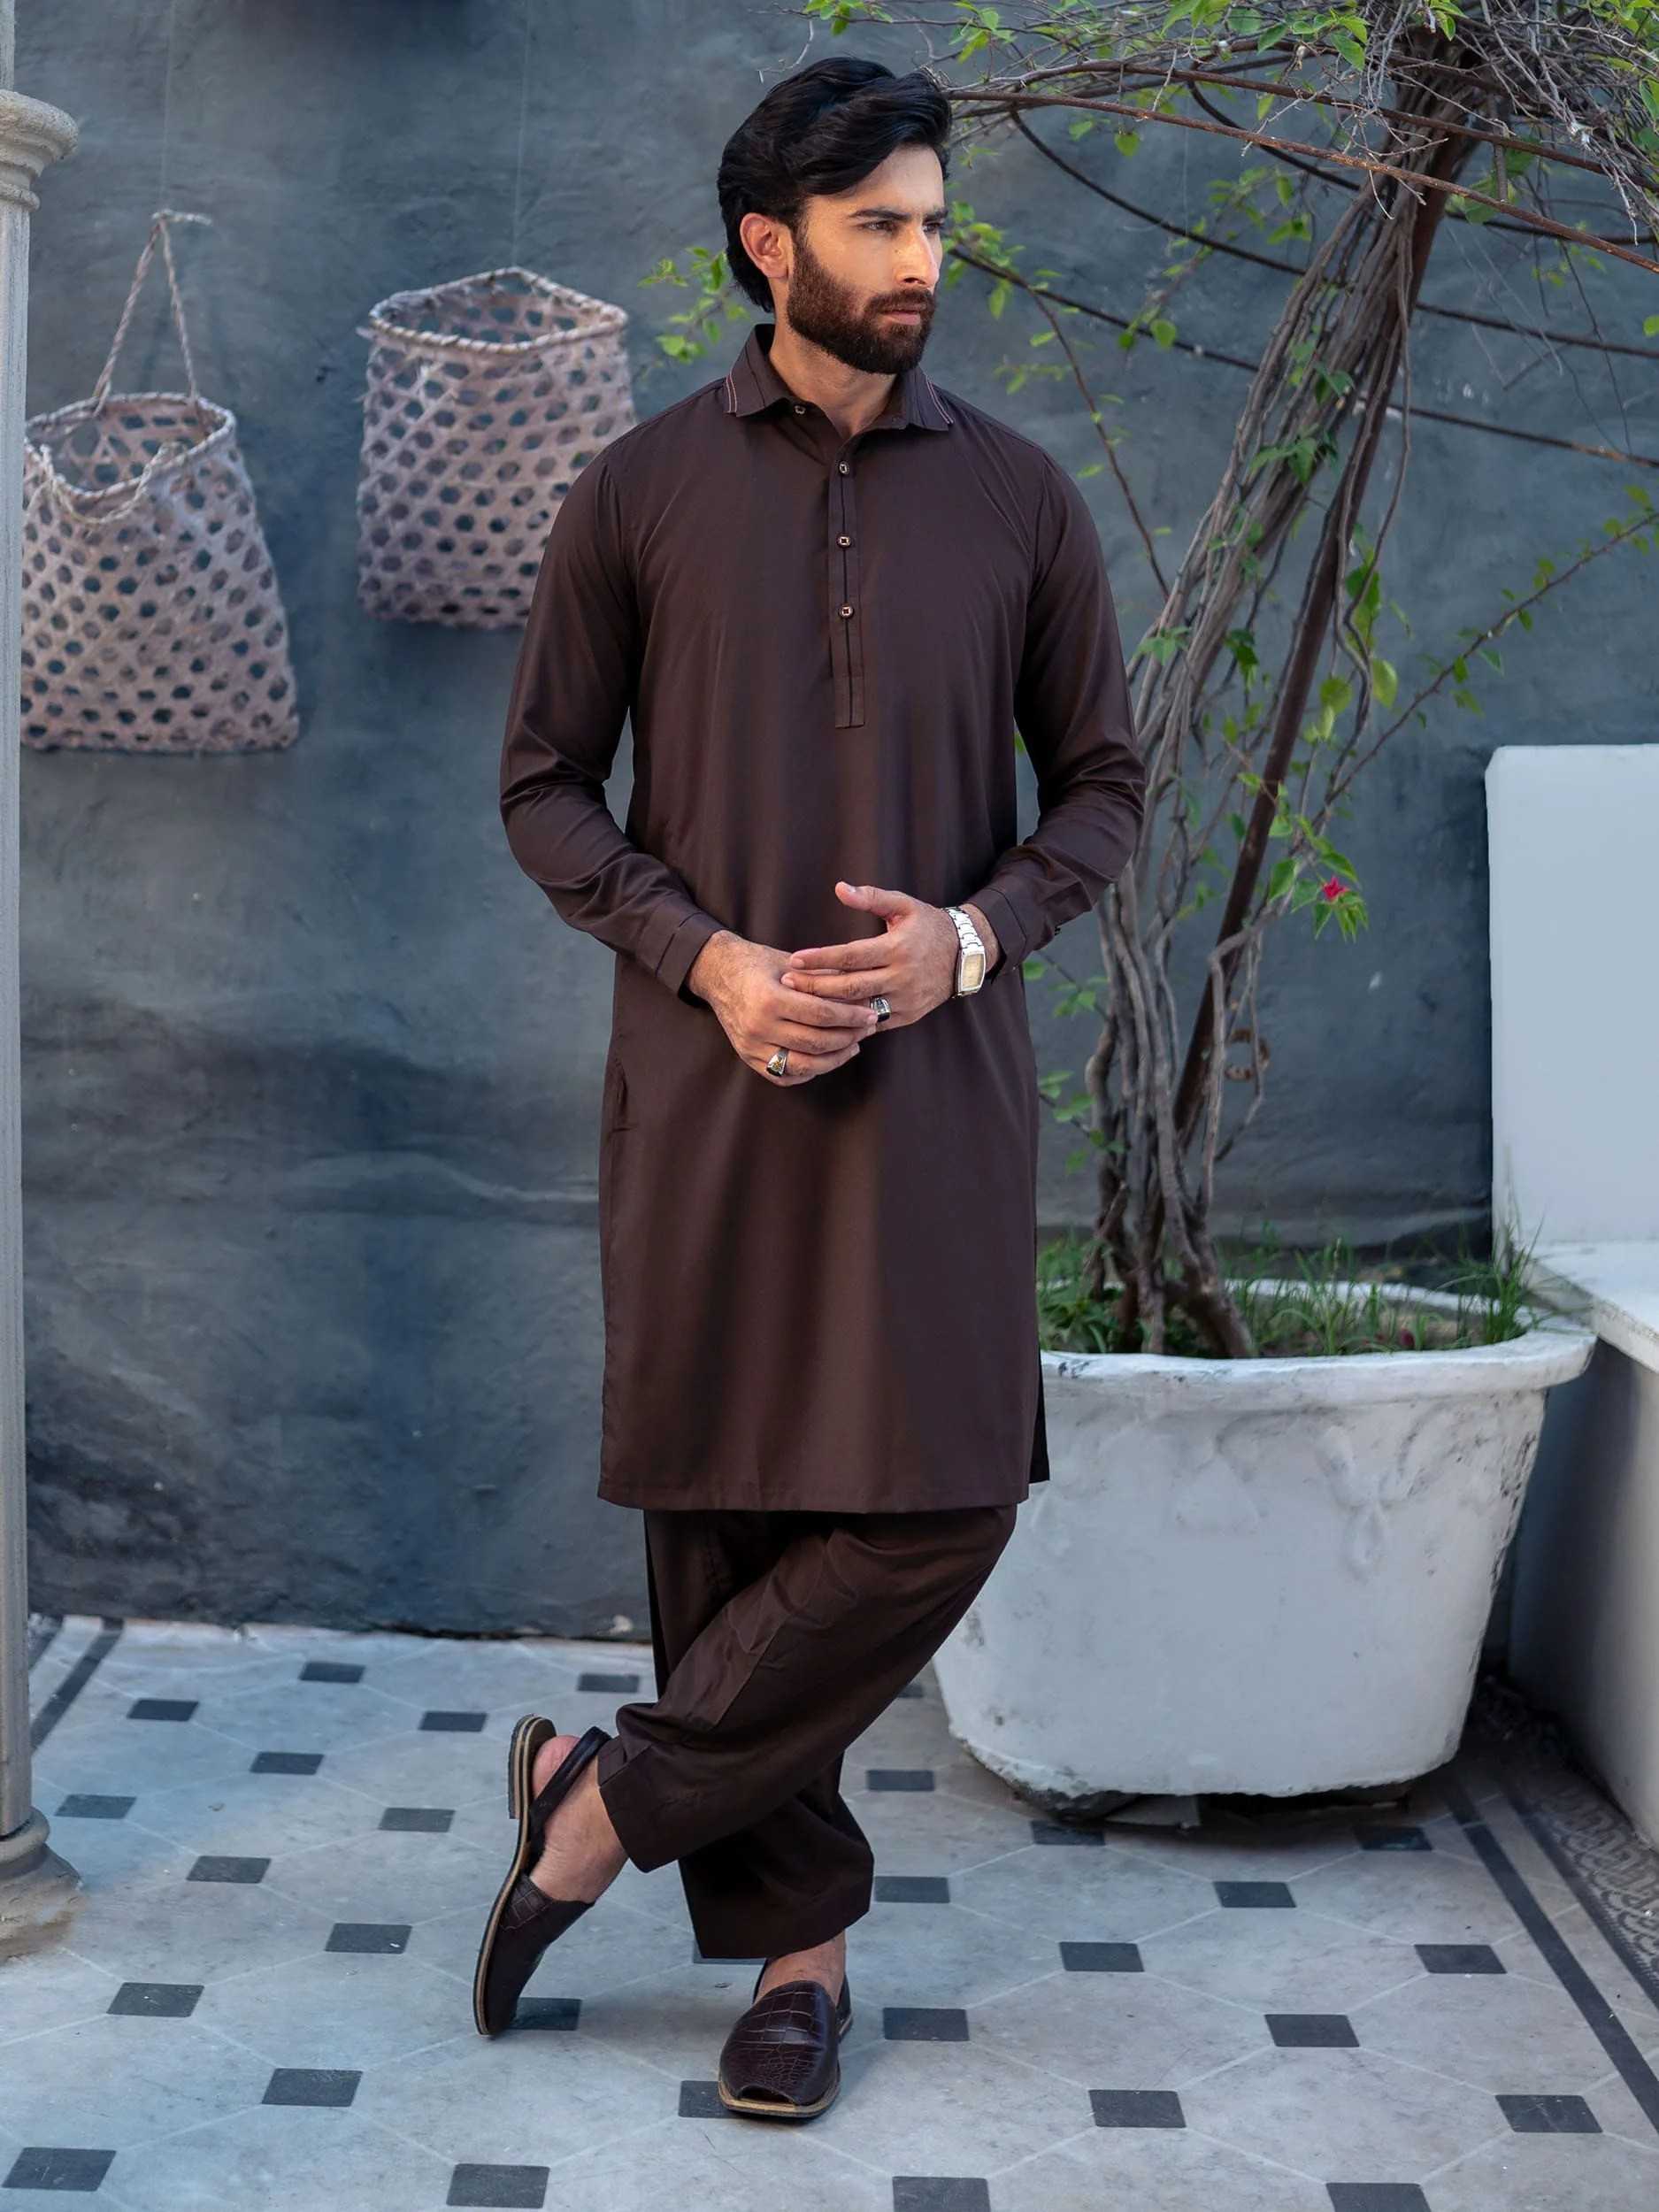 Men shalwar kameez can be worn in professional and casual settings.